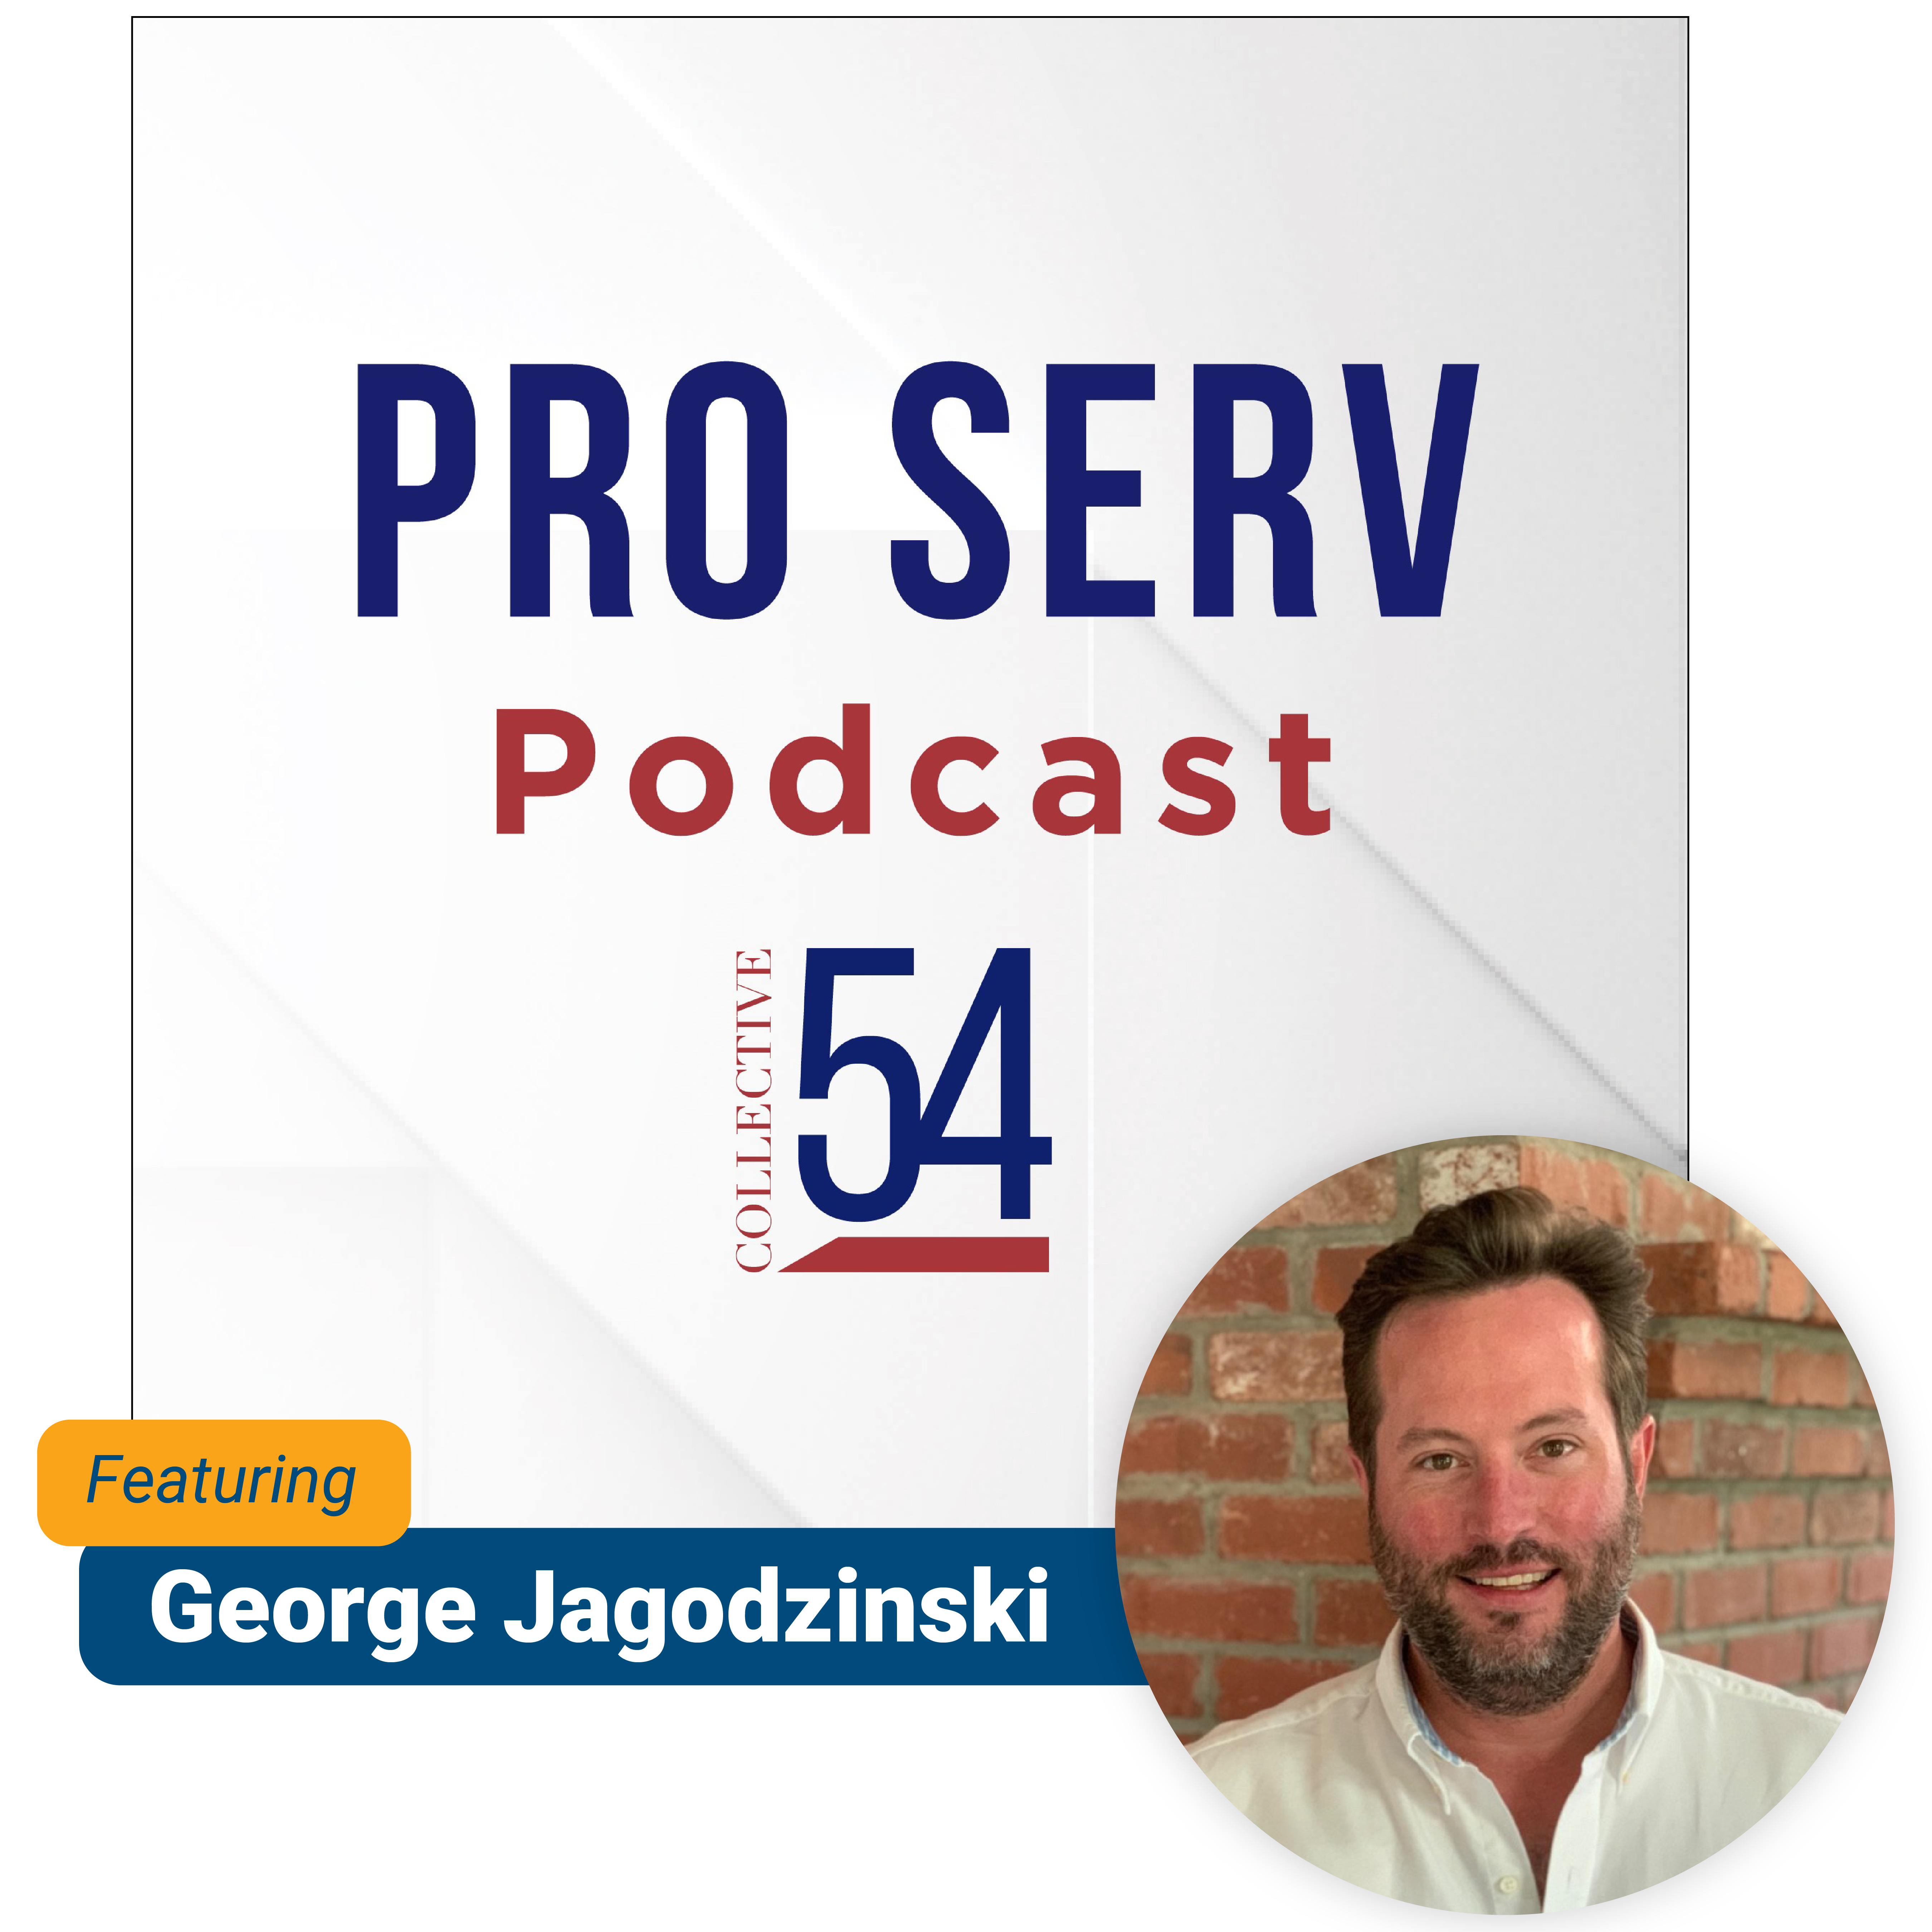 George Jagodzinksi is a featured guest on Collective 54's Pro Serv Podcast